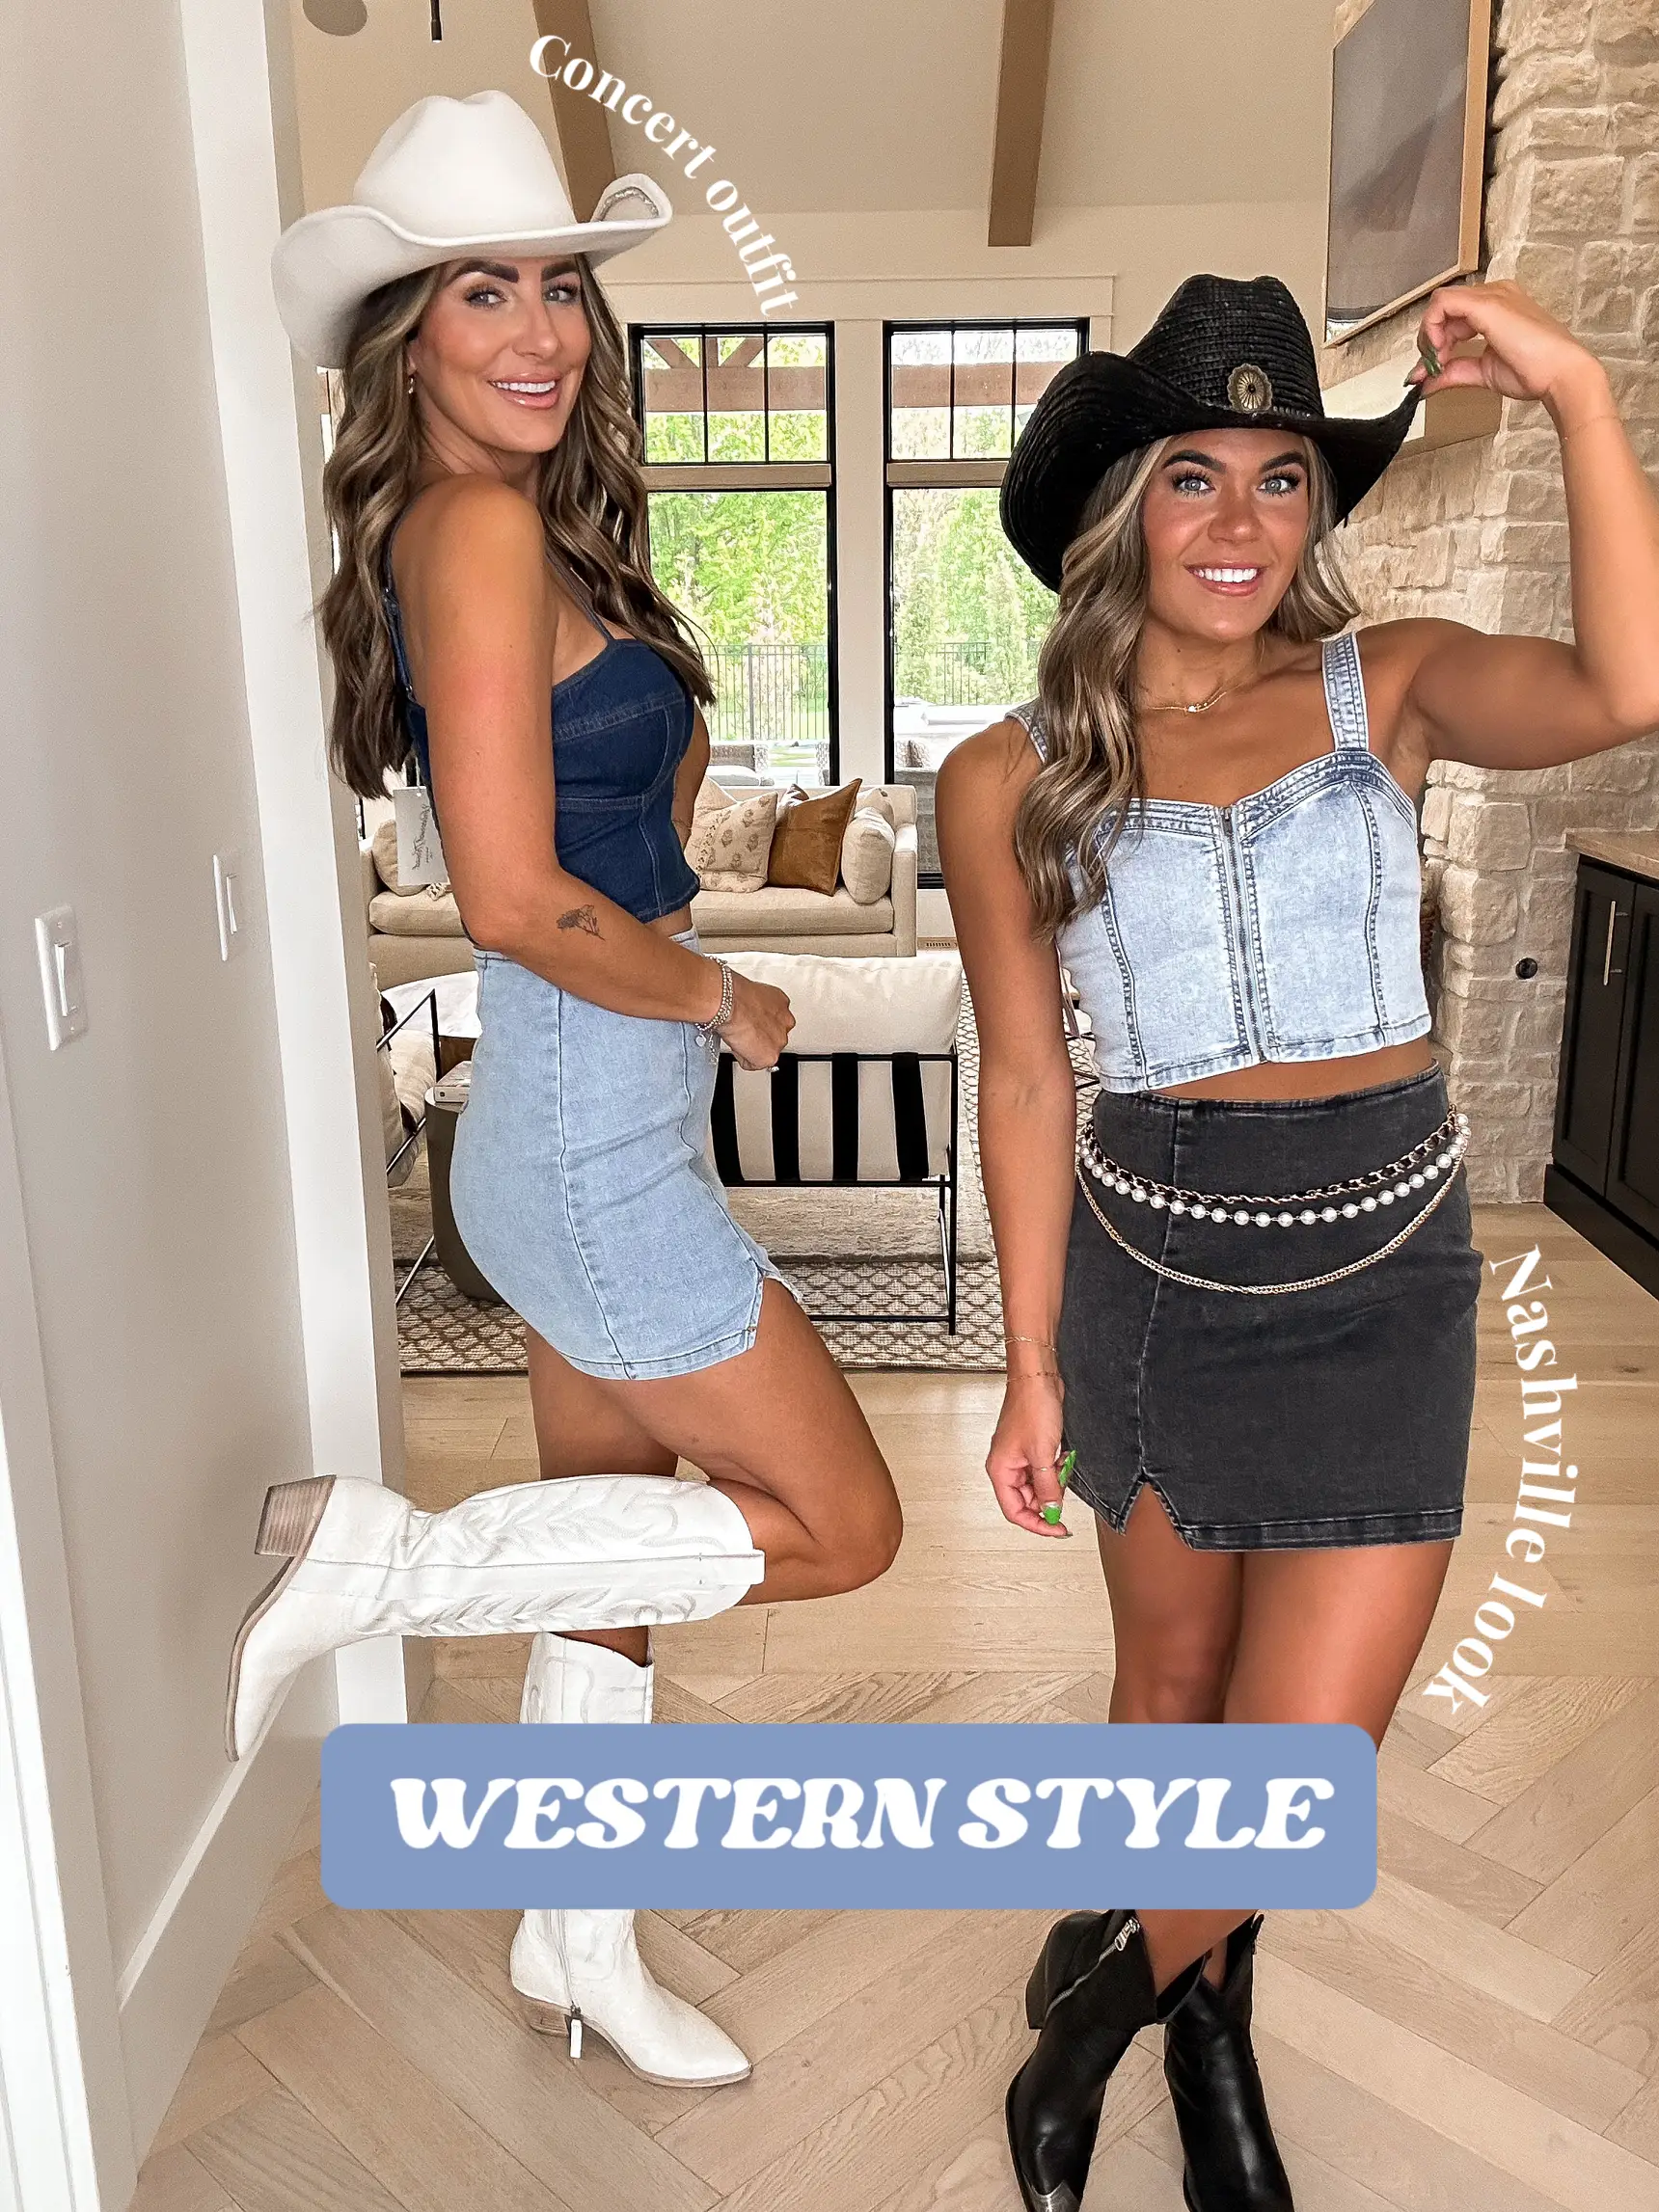 dresses for country concerts